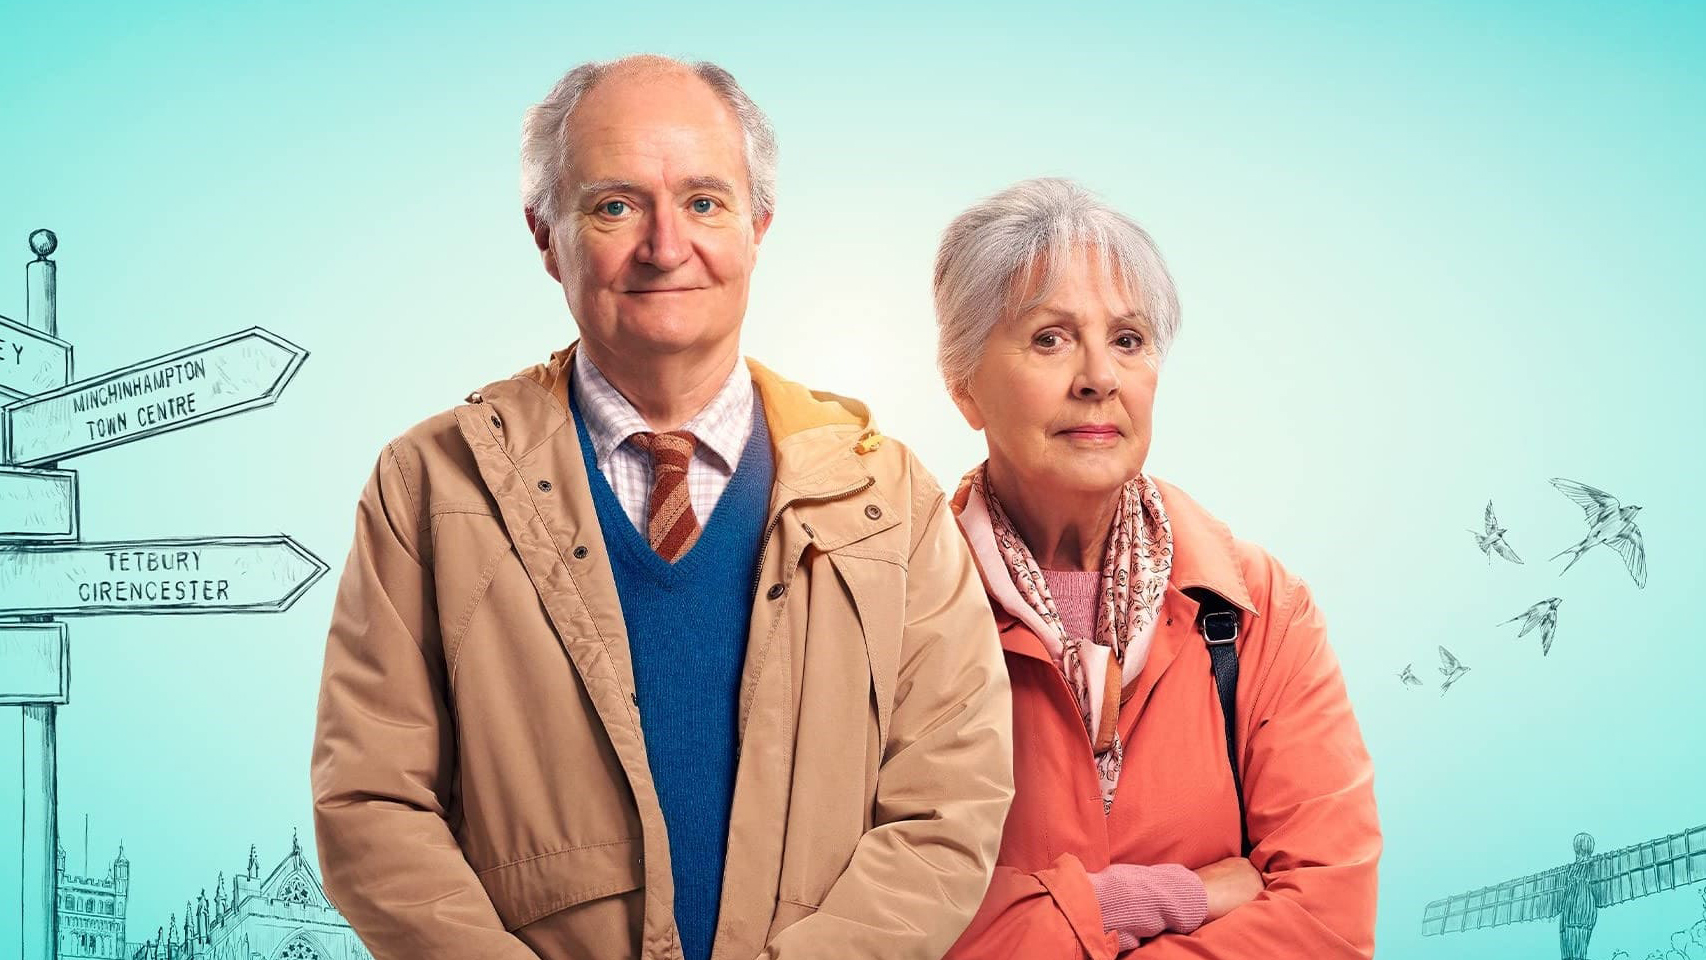 An elderly man and woman looking into the camera, in front of a blue backdrop with drawn signposts